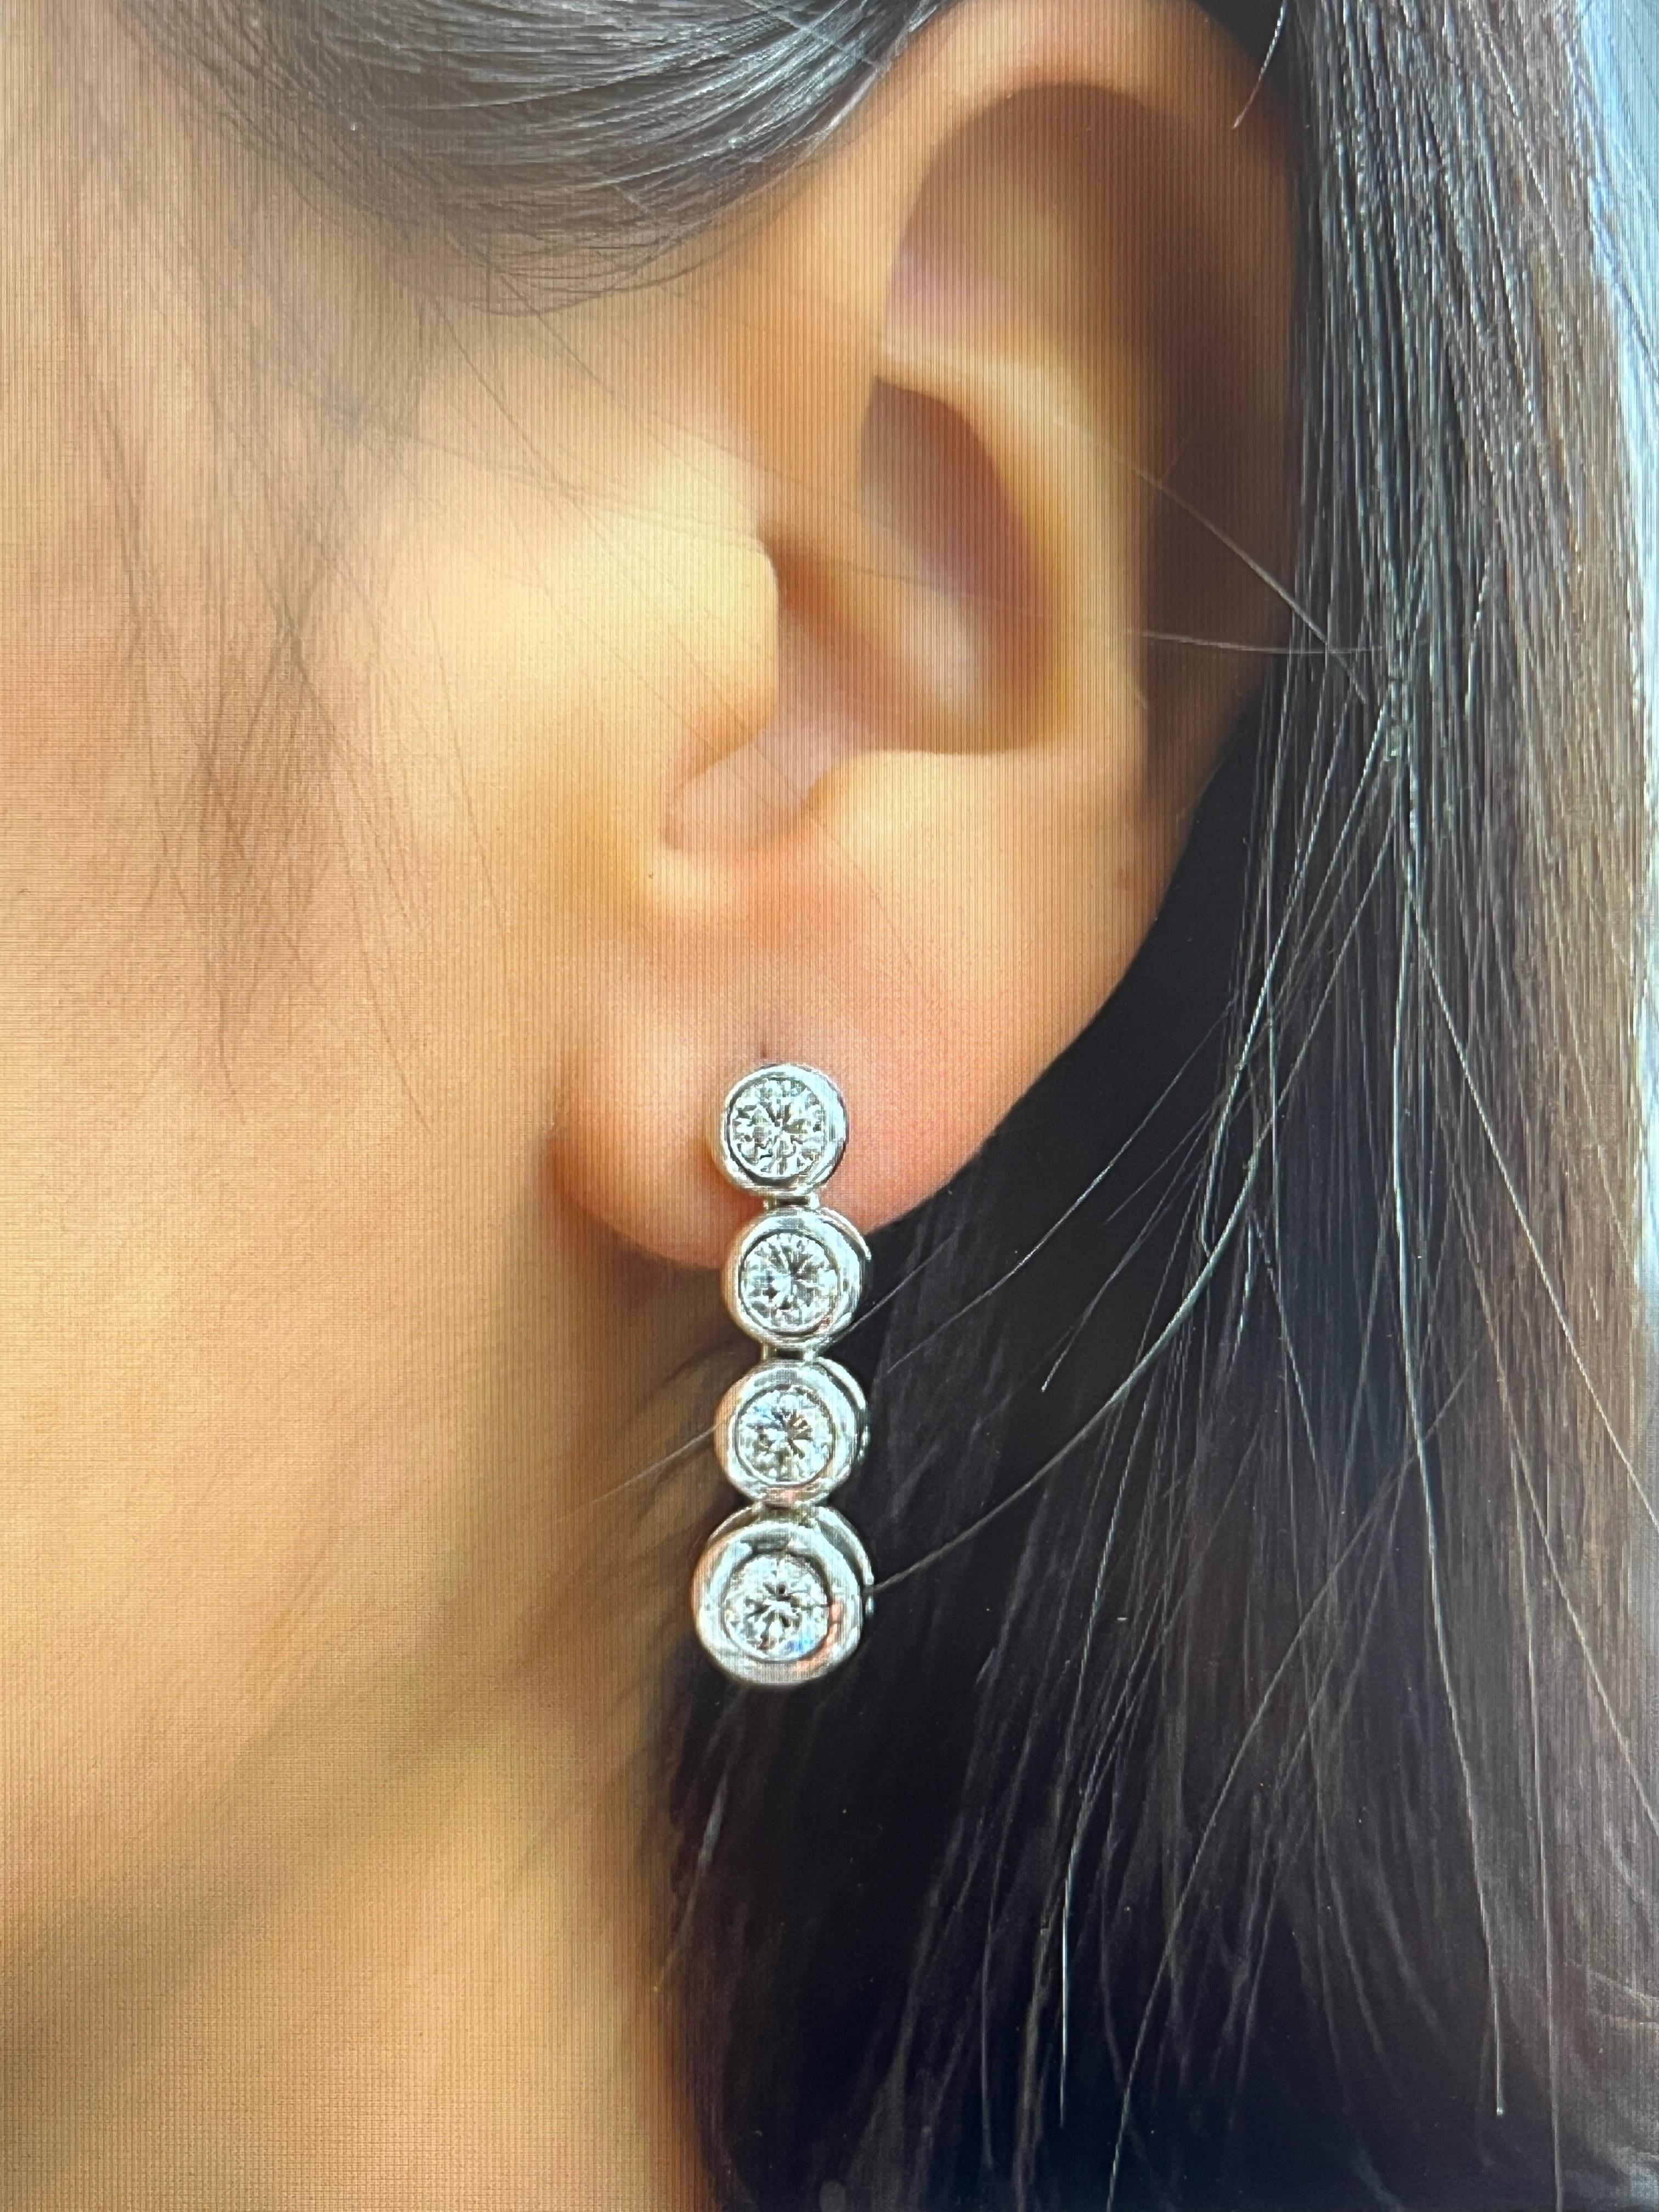 These gorgeous 2.02 ct diamond dangle earrings feature 8 round diamonds set in 14k white gold. The diamonds are G/H in color and VS2/SI1 in clarity. An amazing addition to any wardrobe!